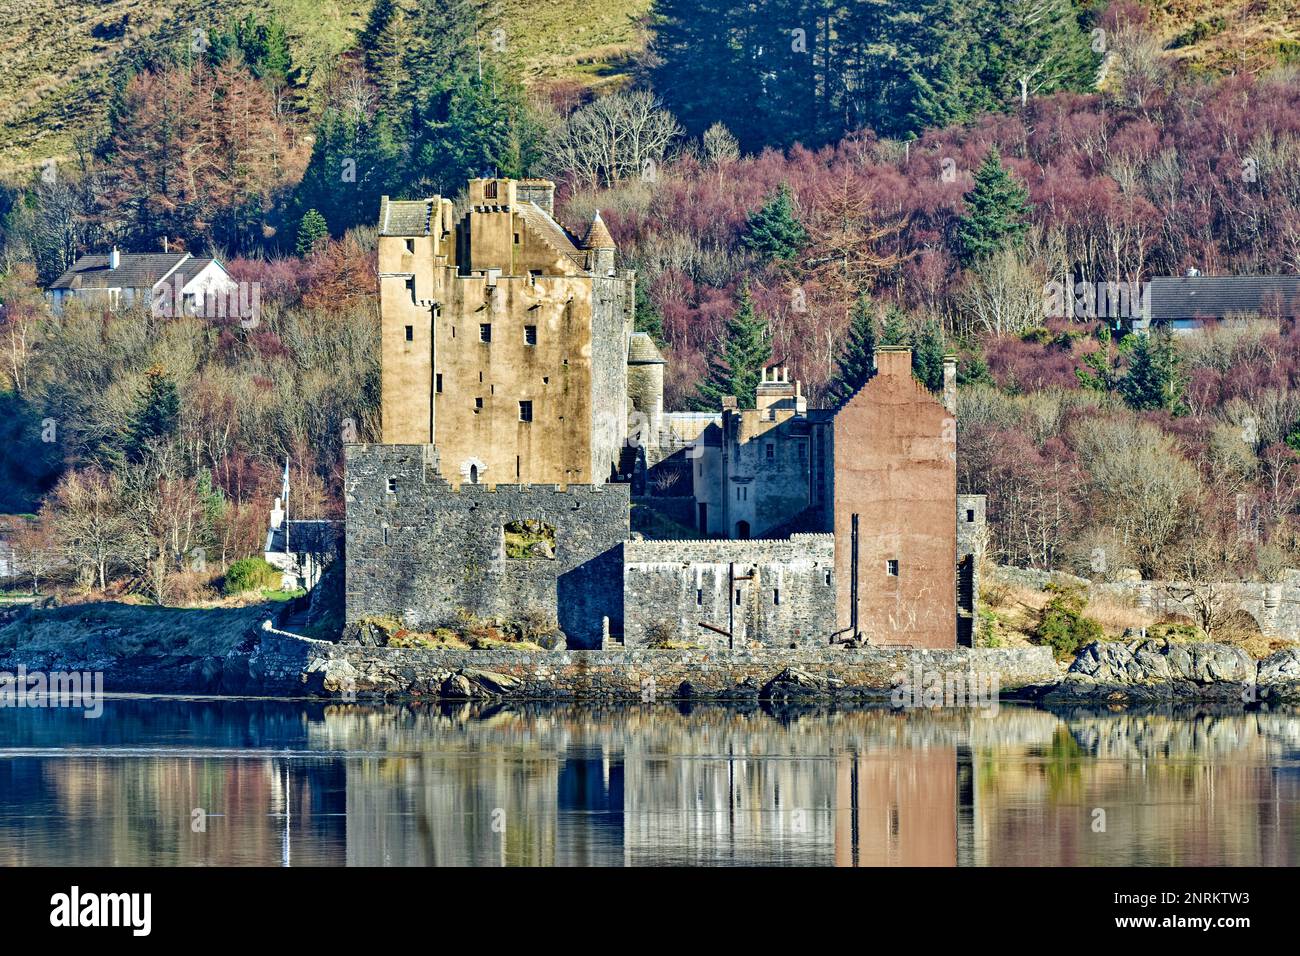 Eilean Donan Castle Loch Duich Scotland colours of the purple birch trees and the building reflected in the sea loch Stock Photo